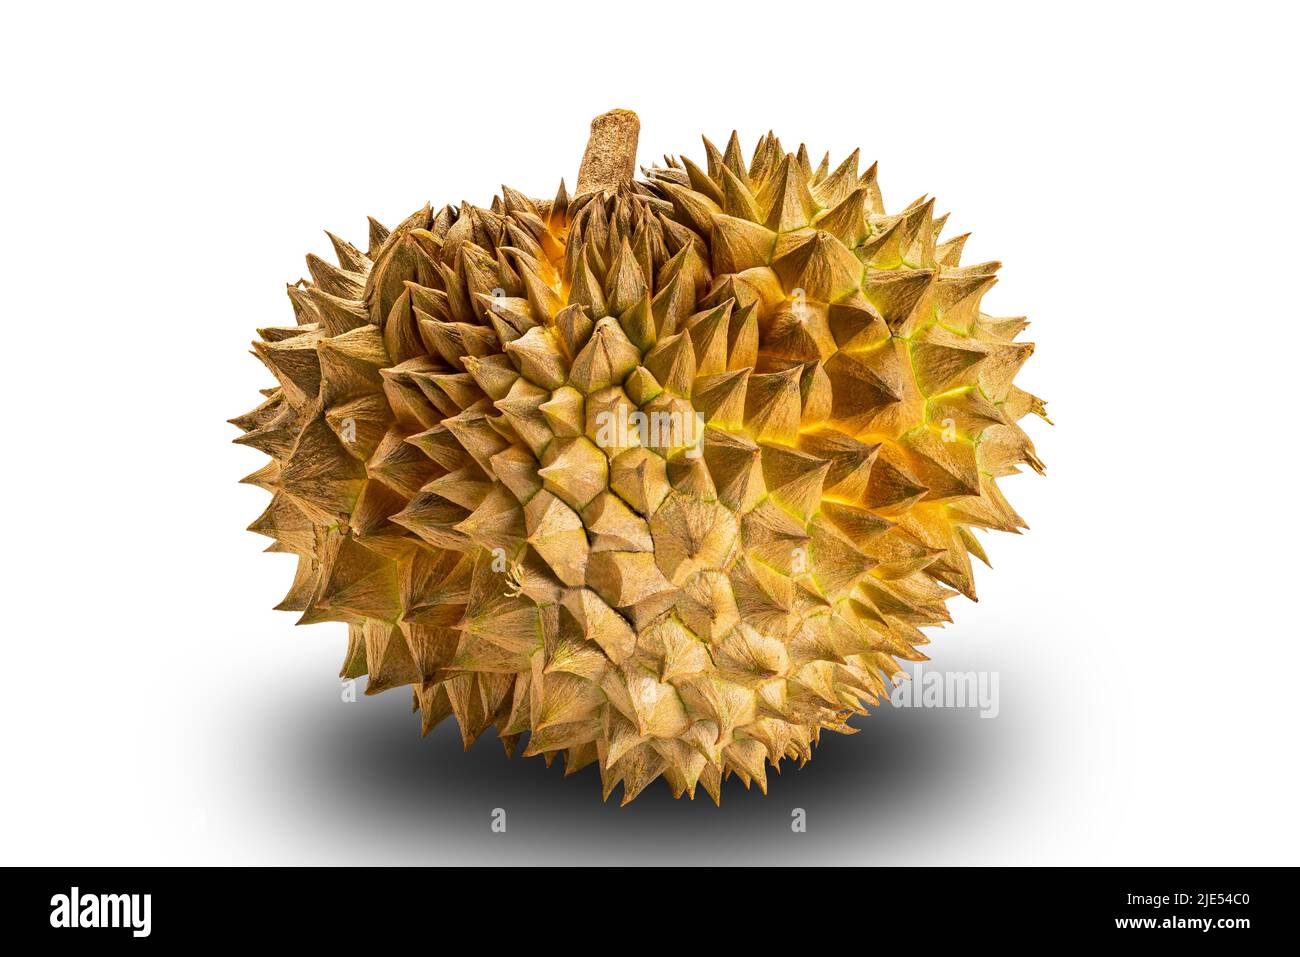 Single whole ripe durian fruit isolated on white background with clipping path. Freshly harvested with sharp spike peel durian on white backgeound.Dur Stock Photo